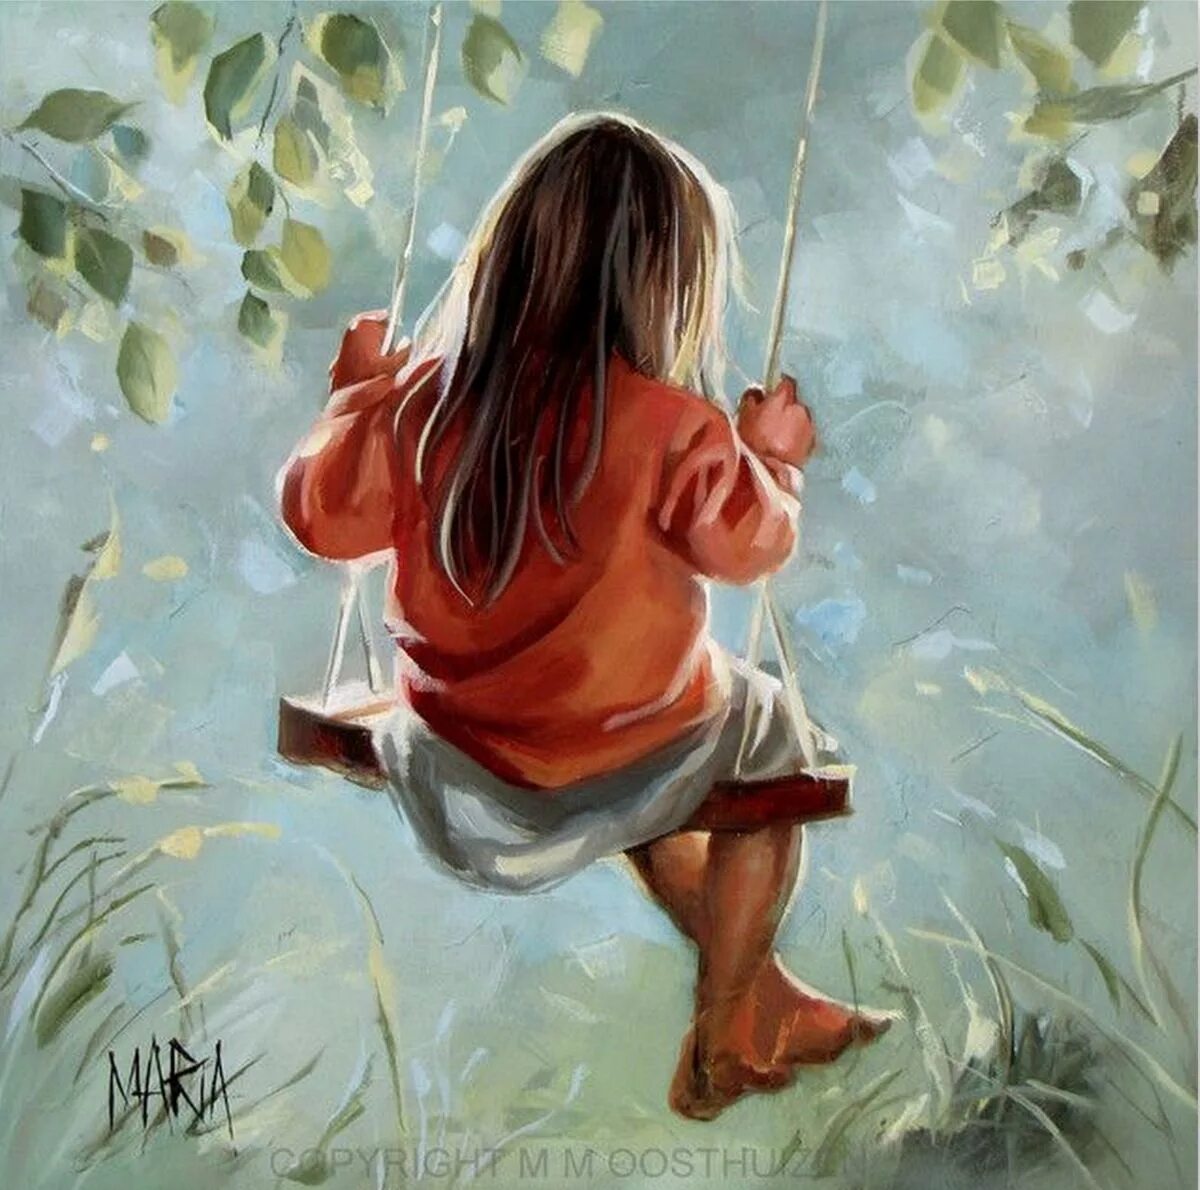 I m painting a picture. Художник Donald Zolan. Художник Maria Oosthuizen.